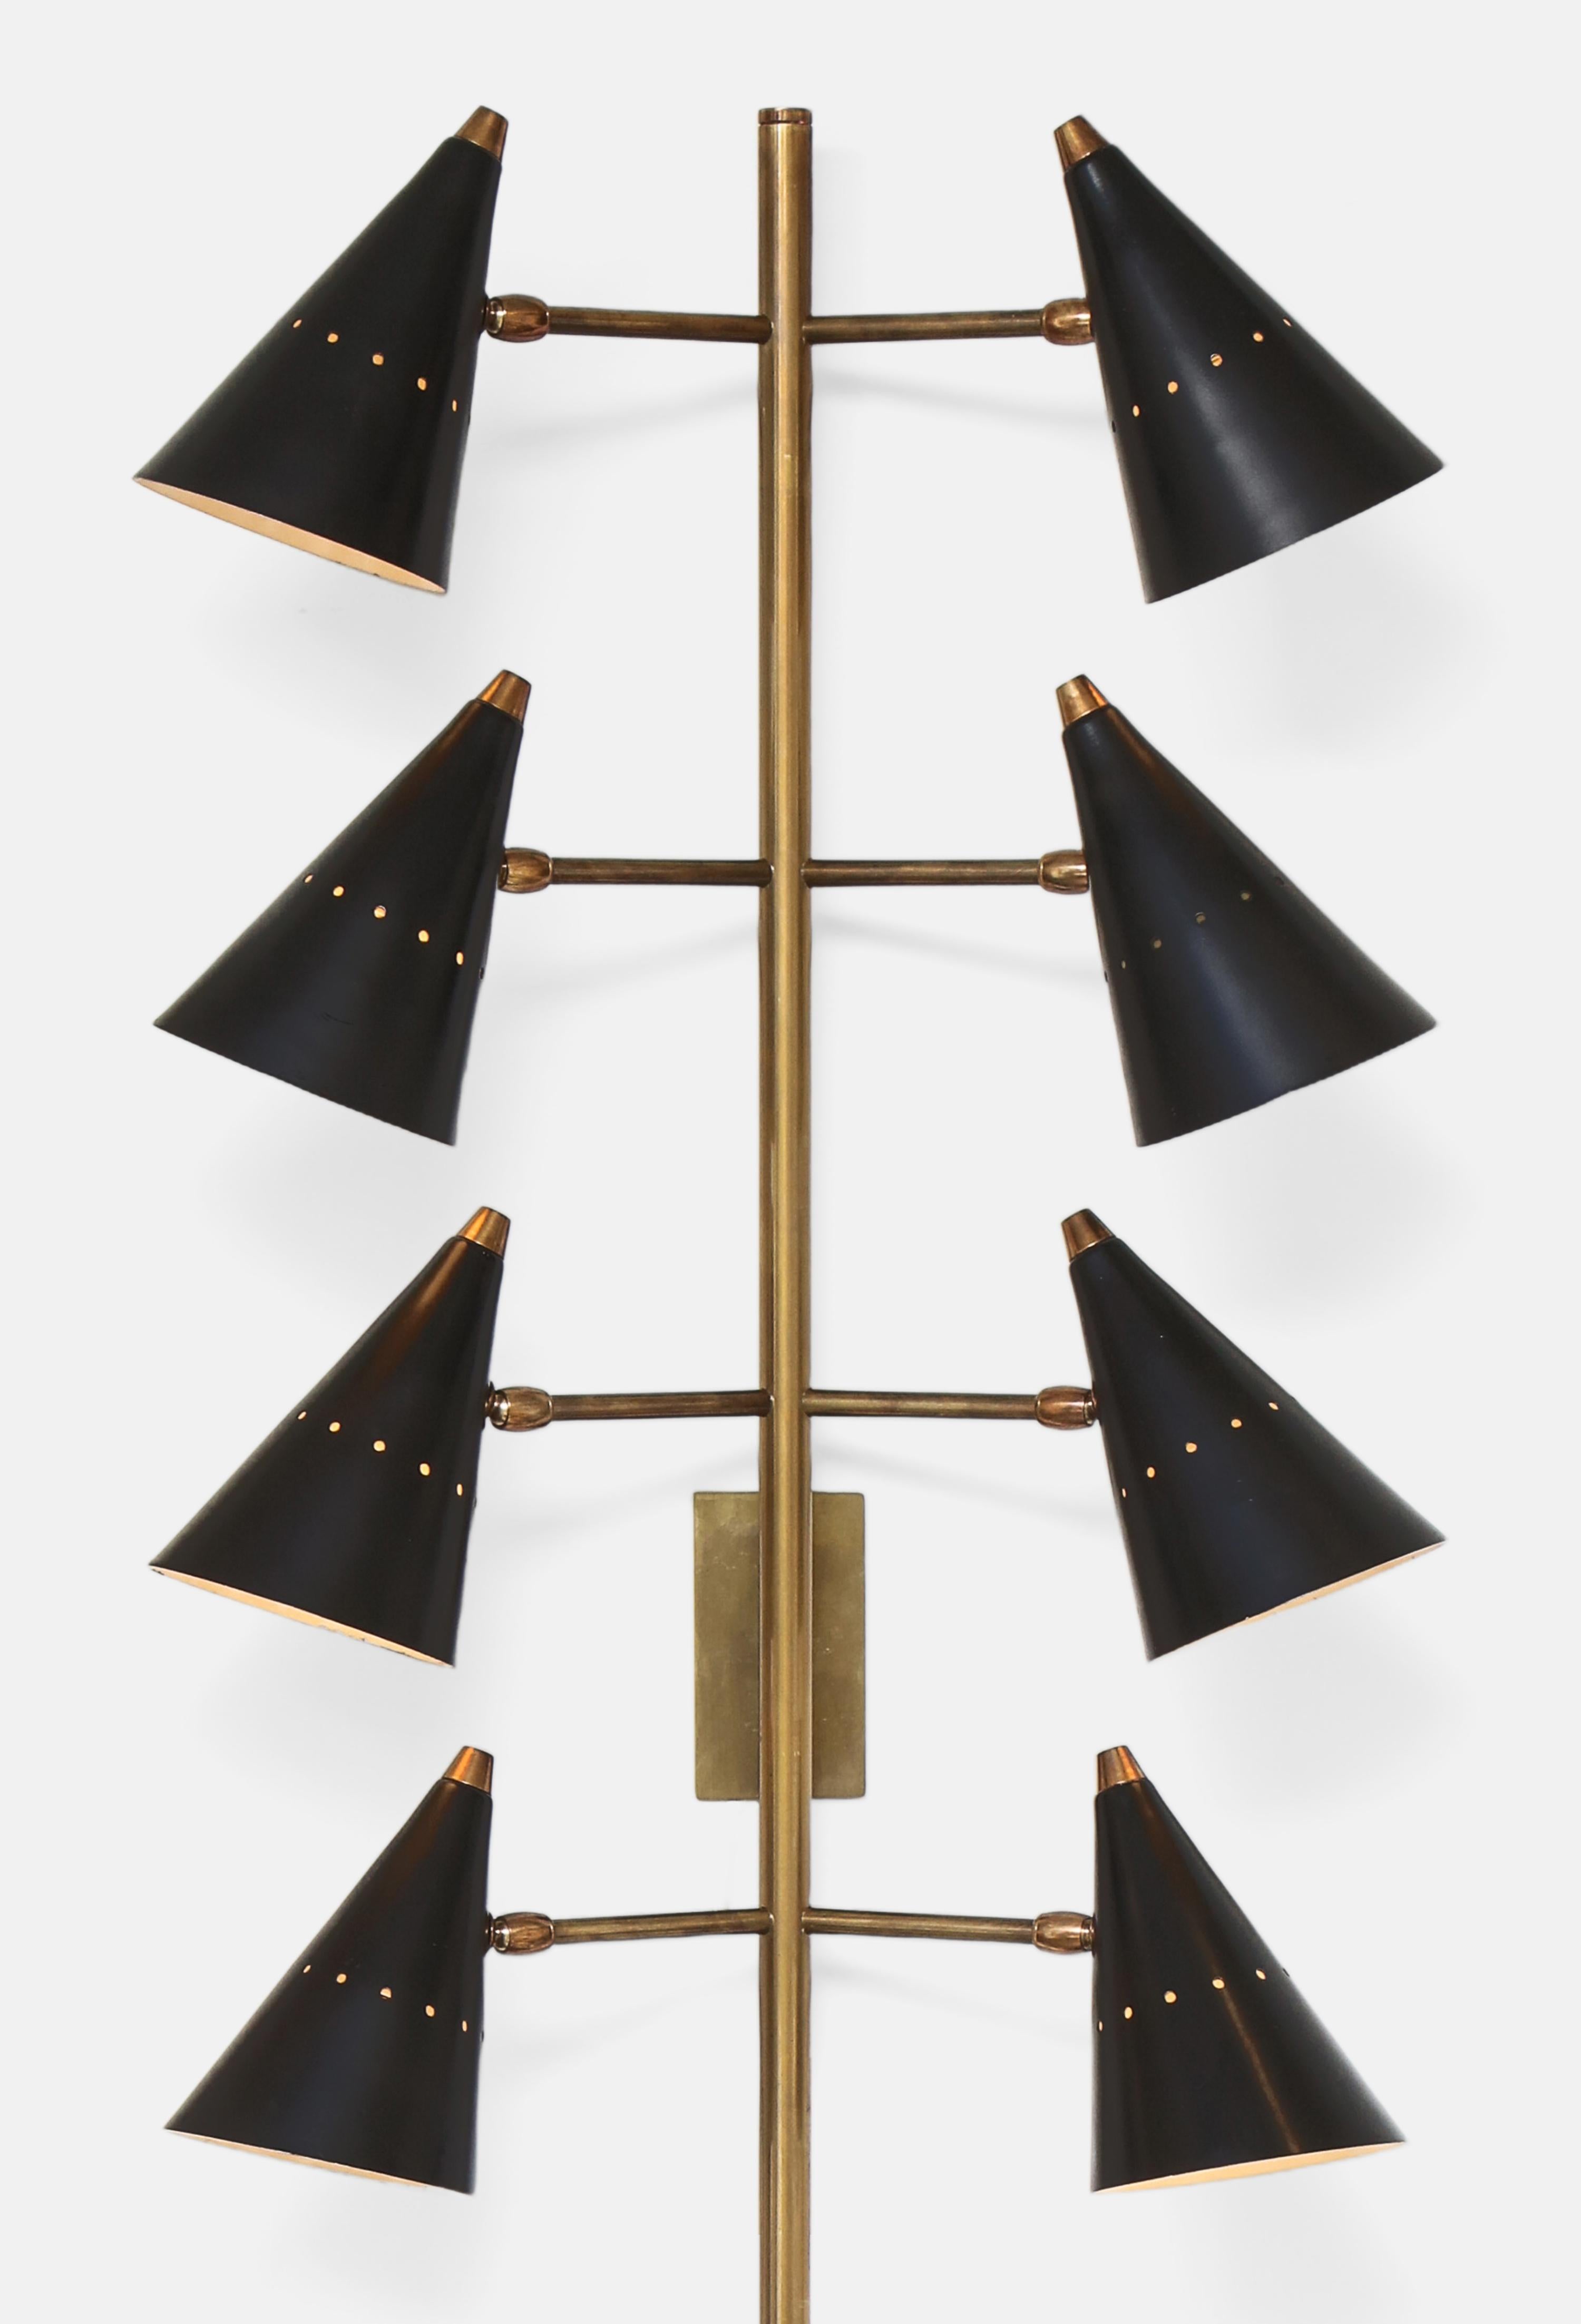 Stilnovo very rare and stunning tall pair of eight-arm wall lights with articulating conical shades in black lacquered aluminum suspended on brass arms and mounted long stem, Italy, 1950s. These original Stilnovo modernist wall lights are monumental